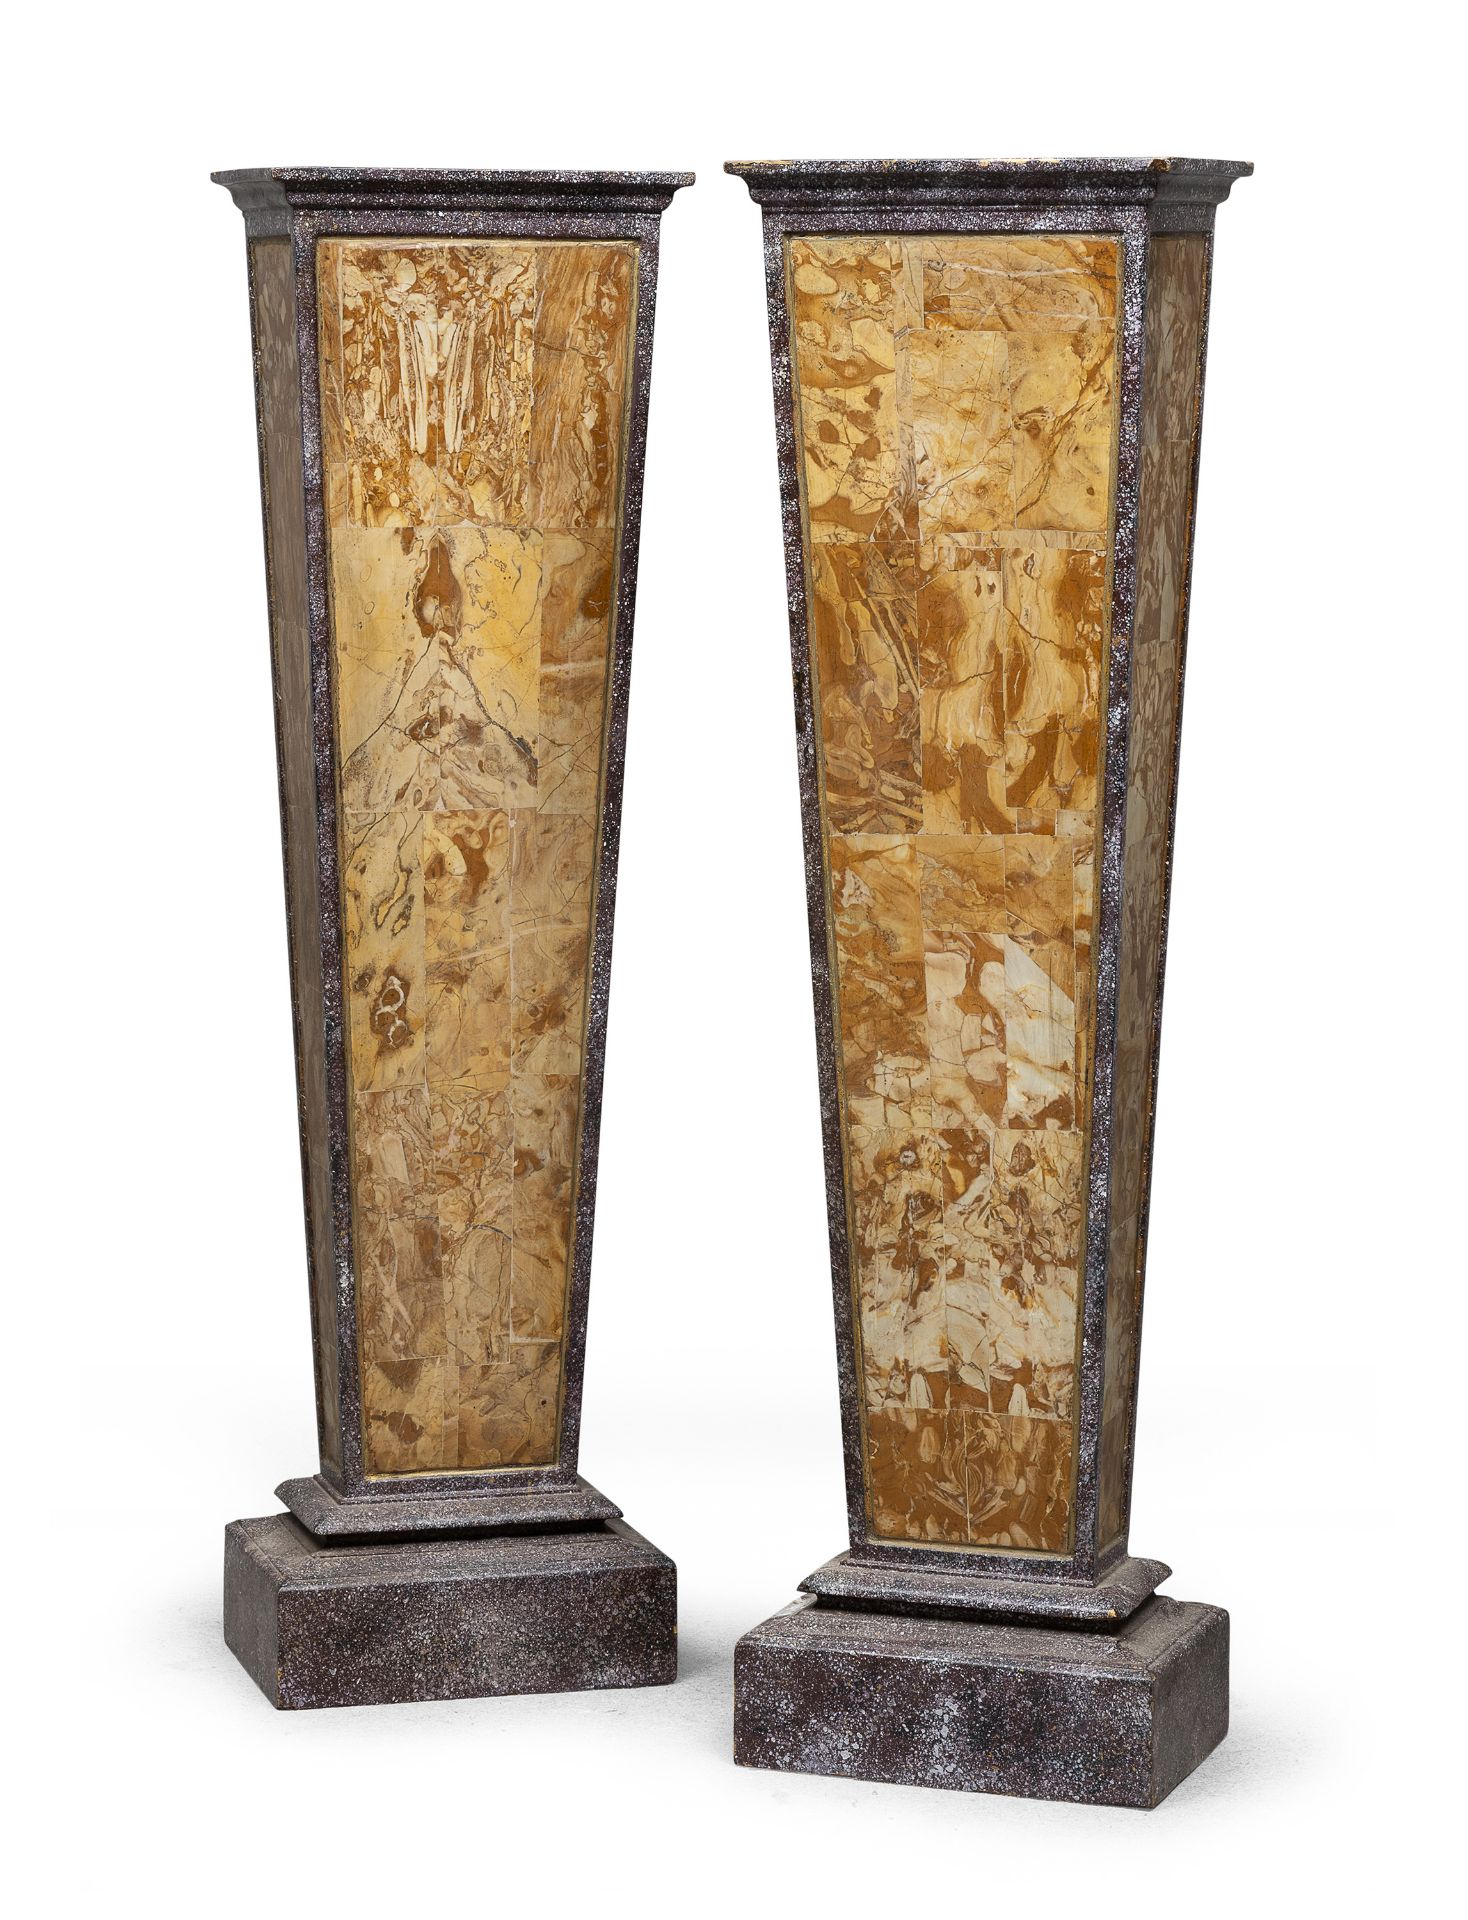 PAIR OF MARBLE-PLATED HERMS 20TH CENTURY